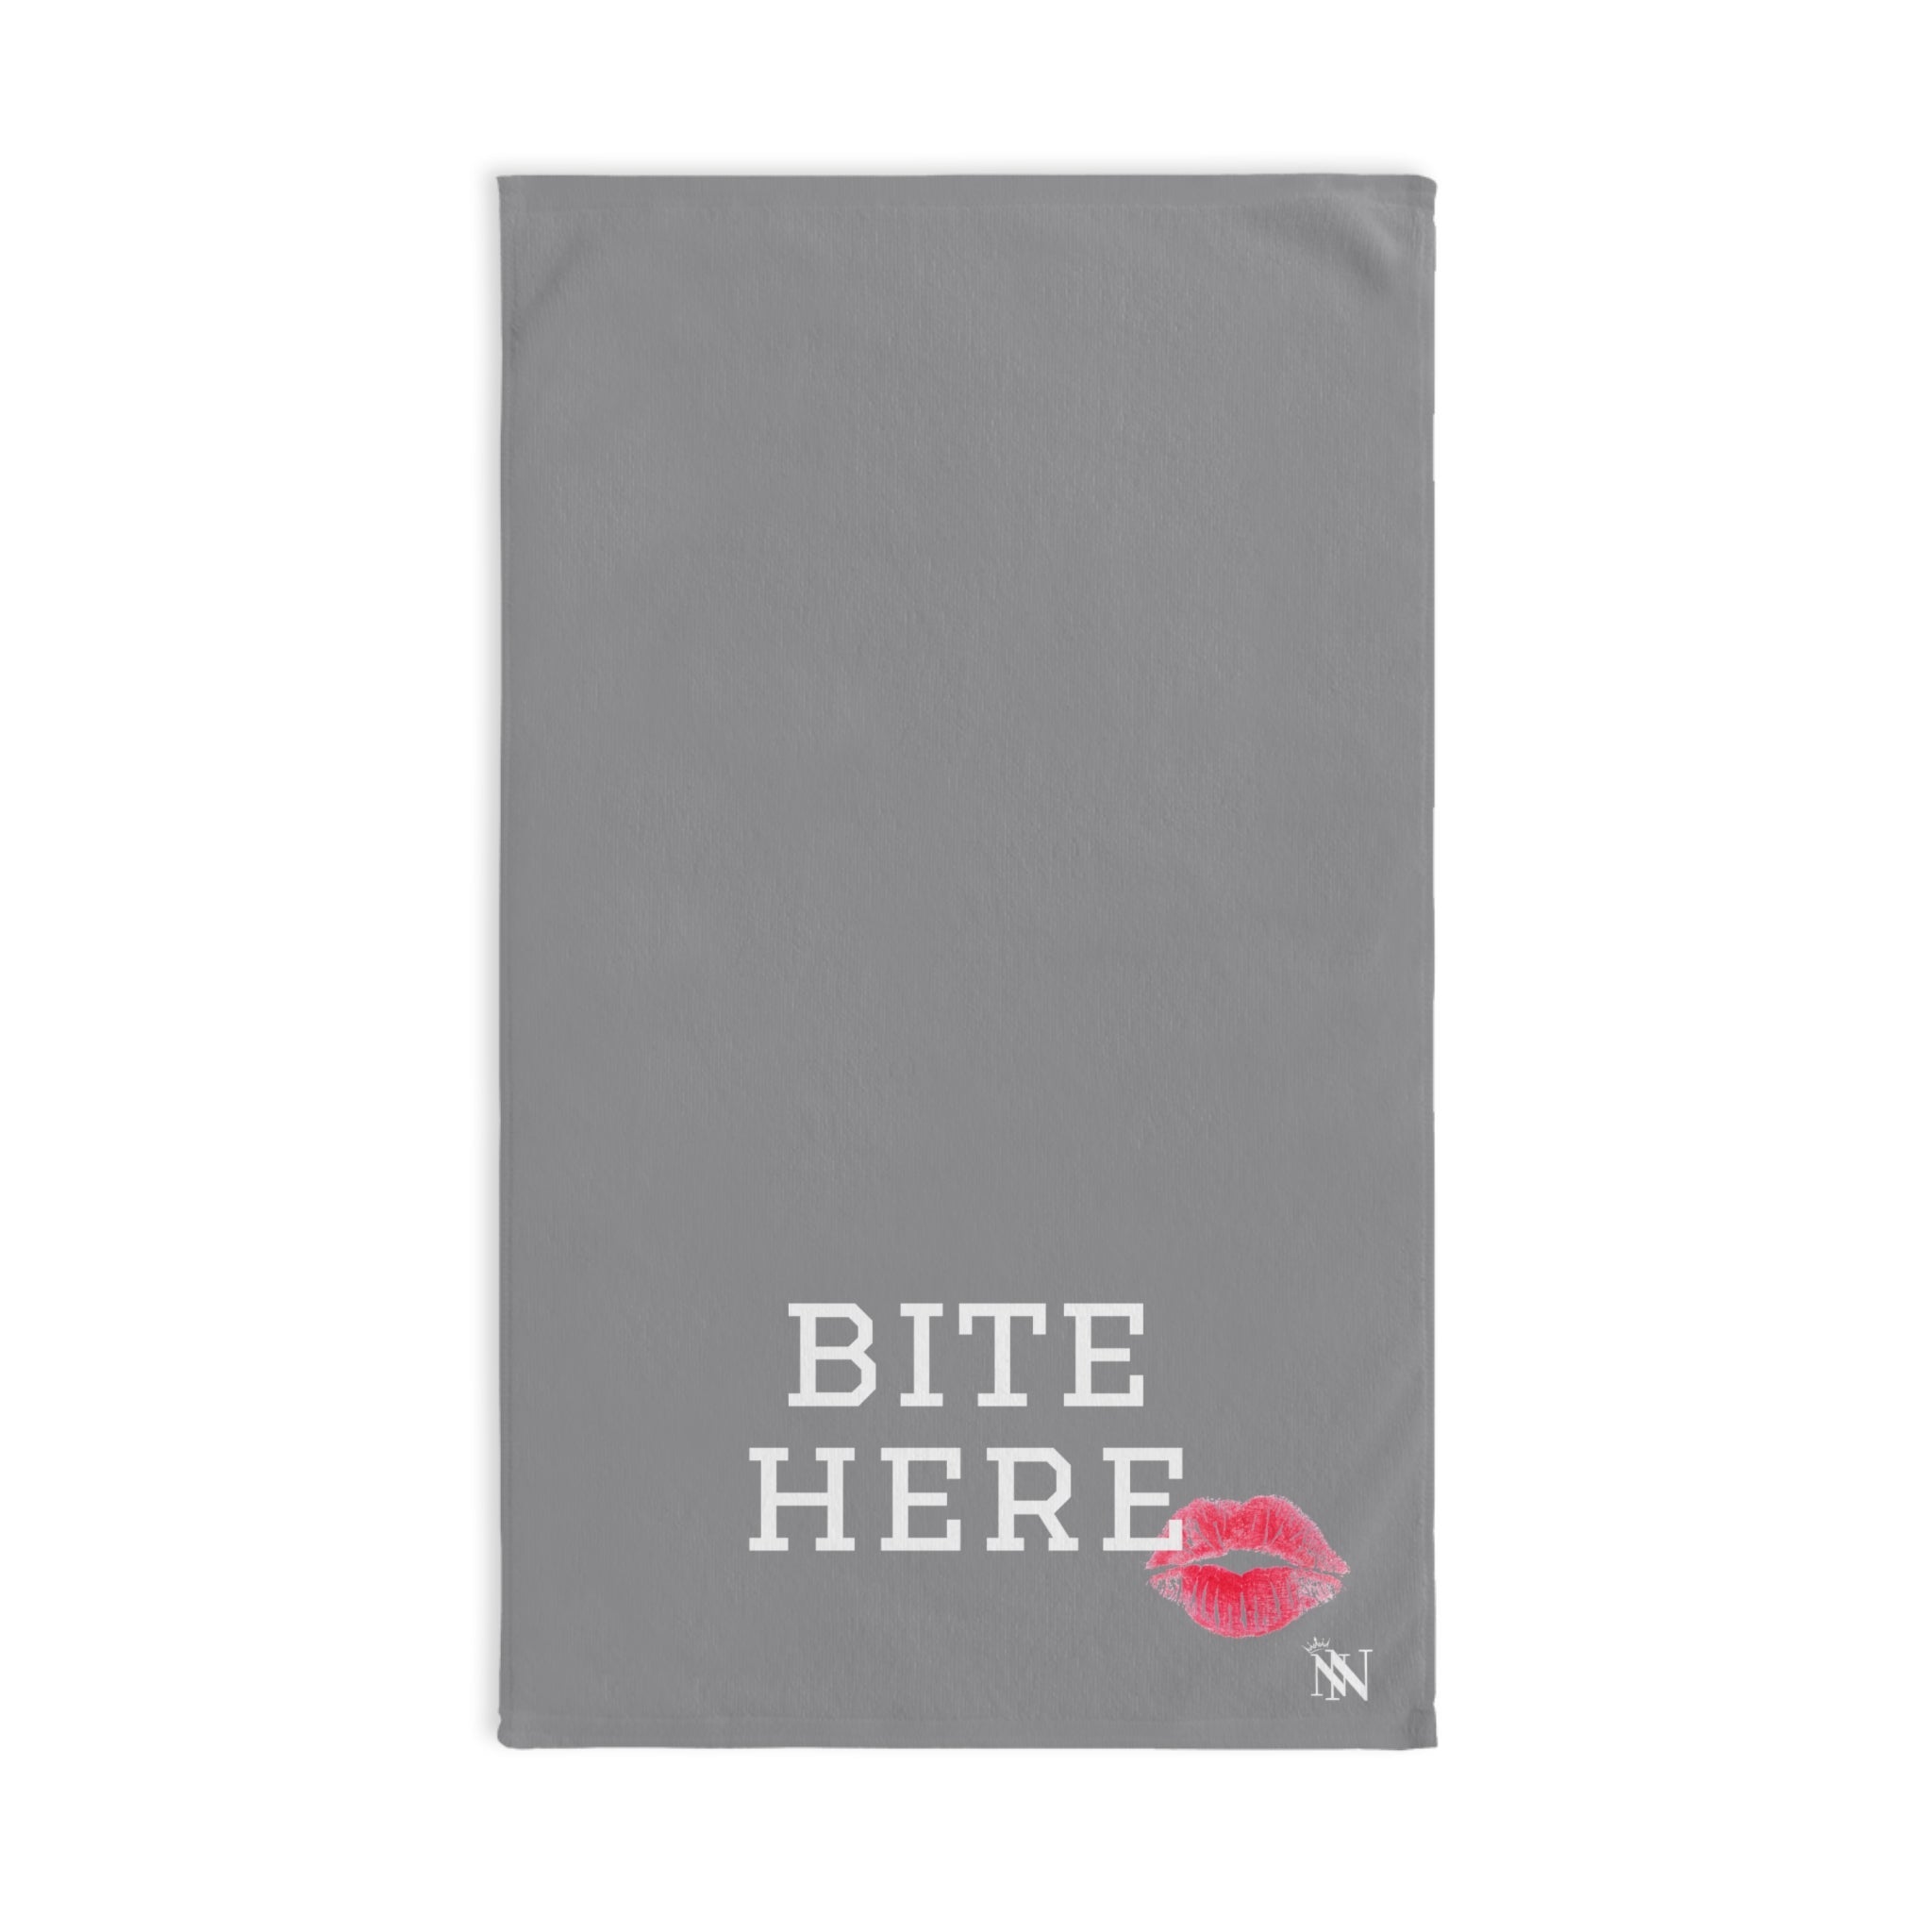 Cheer Bite Here Grey | Anniversary Wedding, Christmas, Valentines Day, Birthday Gifts for Him, Her, Romantic Gifts for Wife, Girlfriend, Couples Gifts for Boyfriend, Husband NECTAR NAPKINS